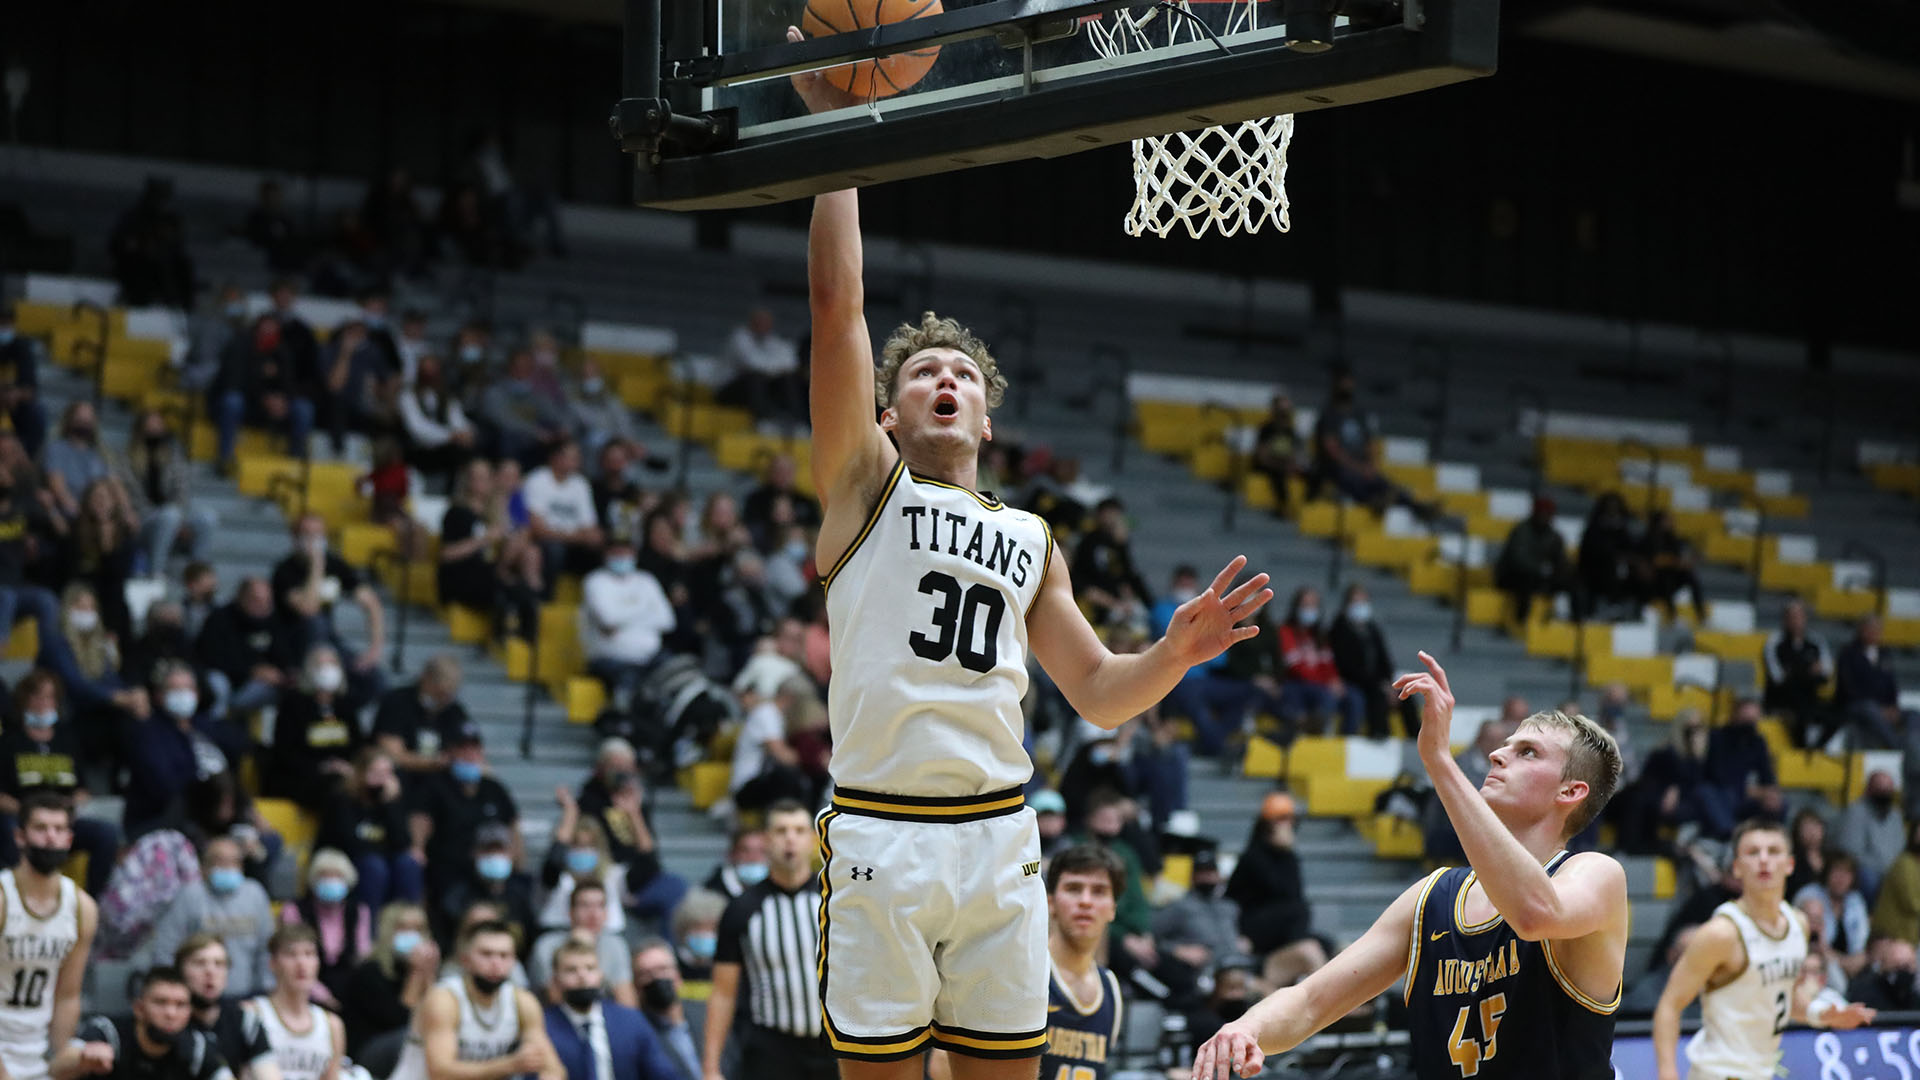 Levi Borchert notched his ninth career double-double with 13 points and 15 rebounds to go along with a game best six assists against the Falcons.